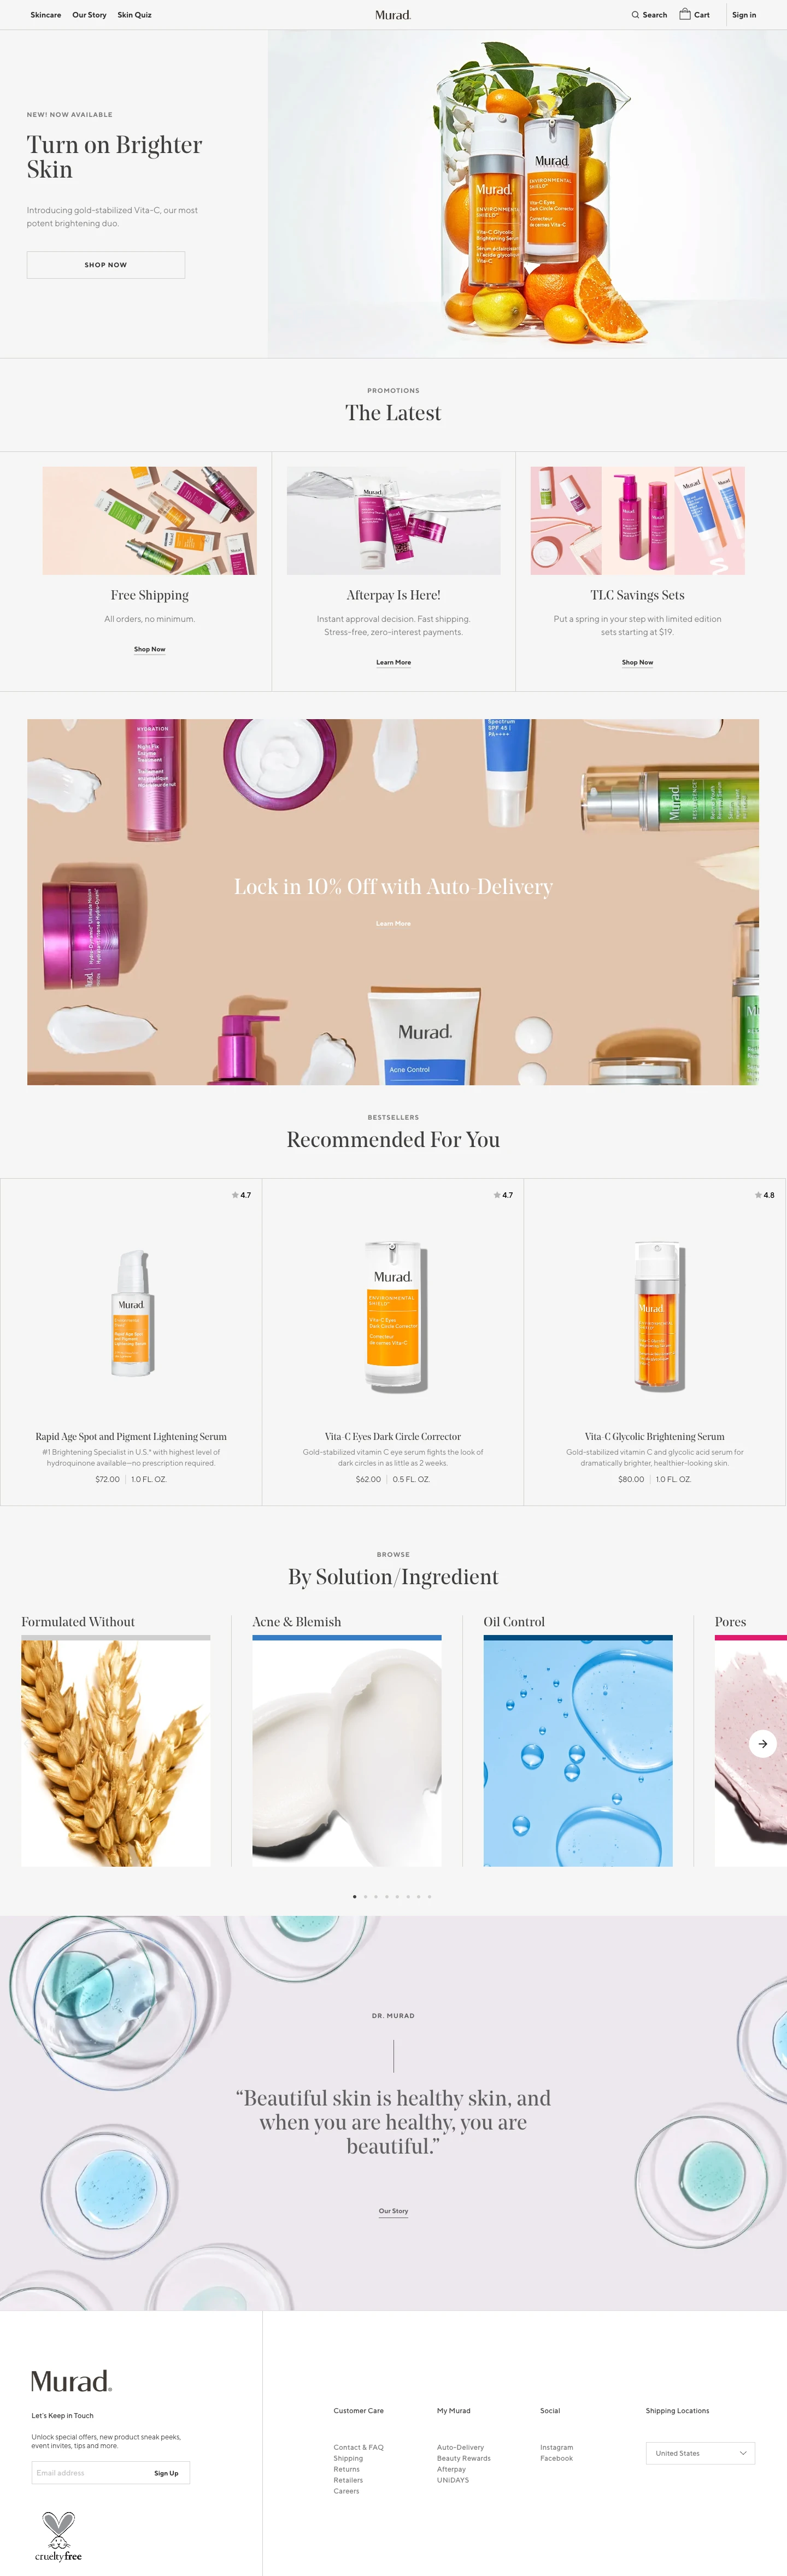 Murad Landing Page Example: Gain total skin wellness through Murad’s science -backed professional skin care treatments and solutions that promote healthy, nourished, and beautiful skin.